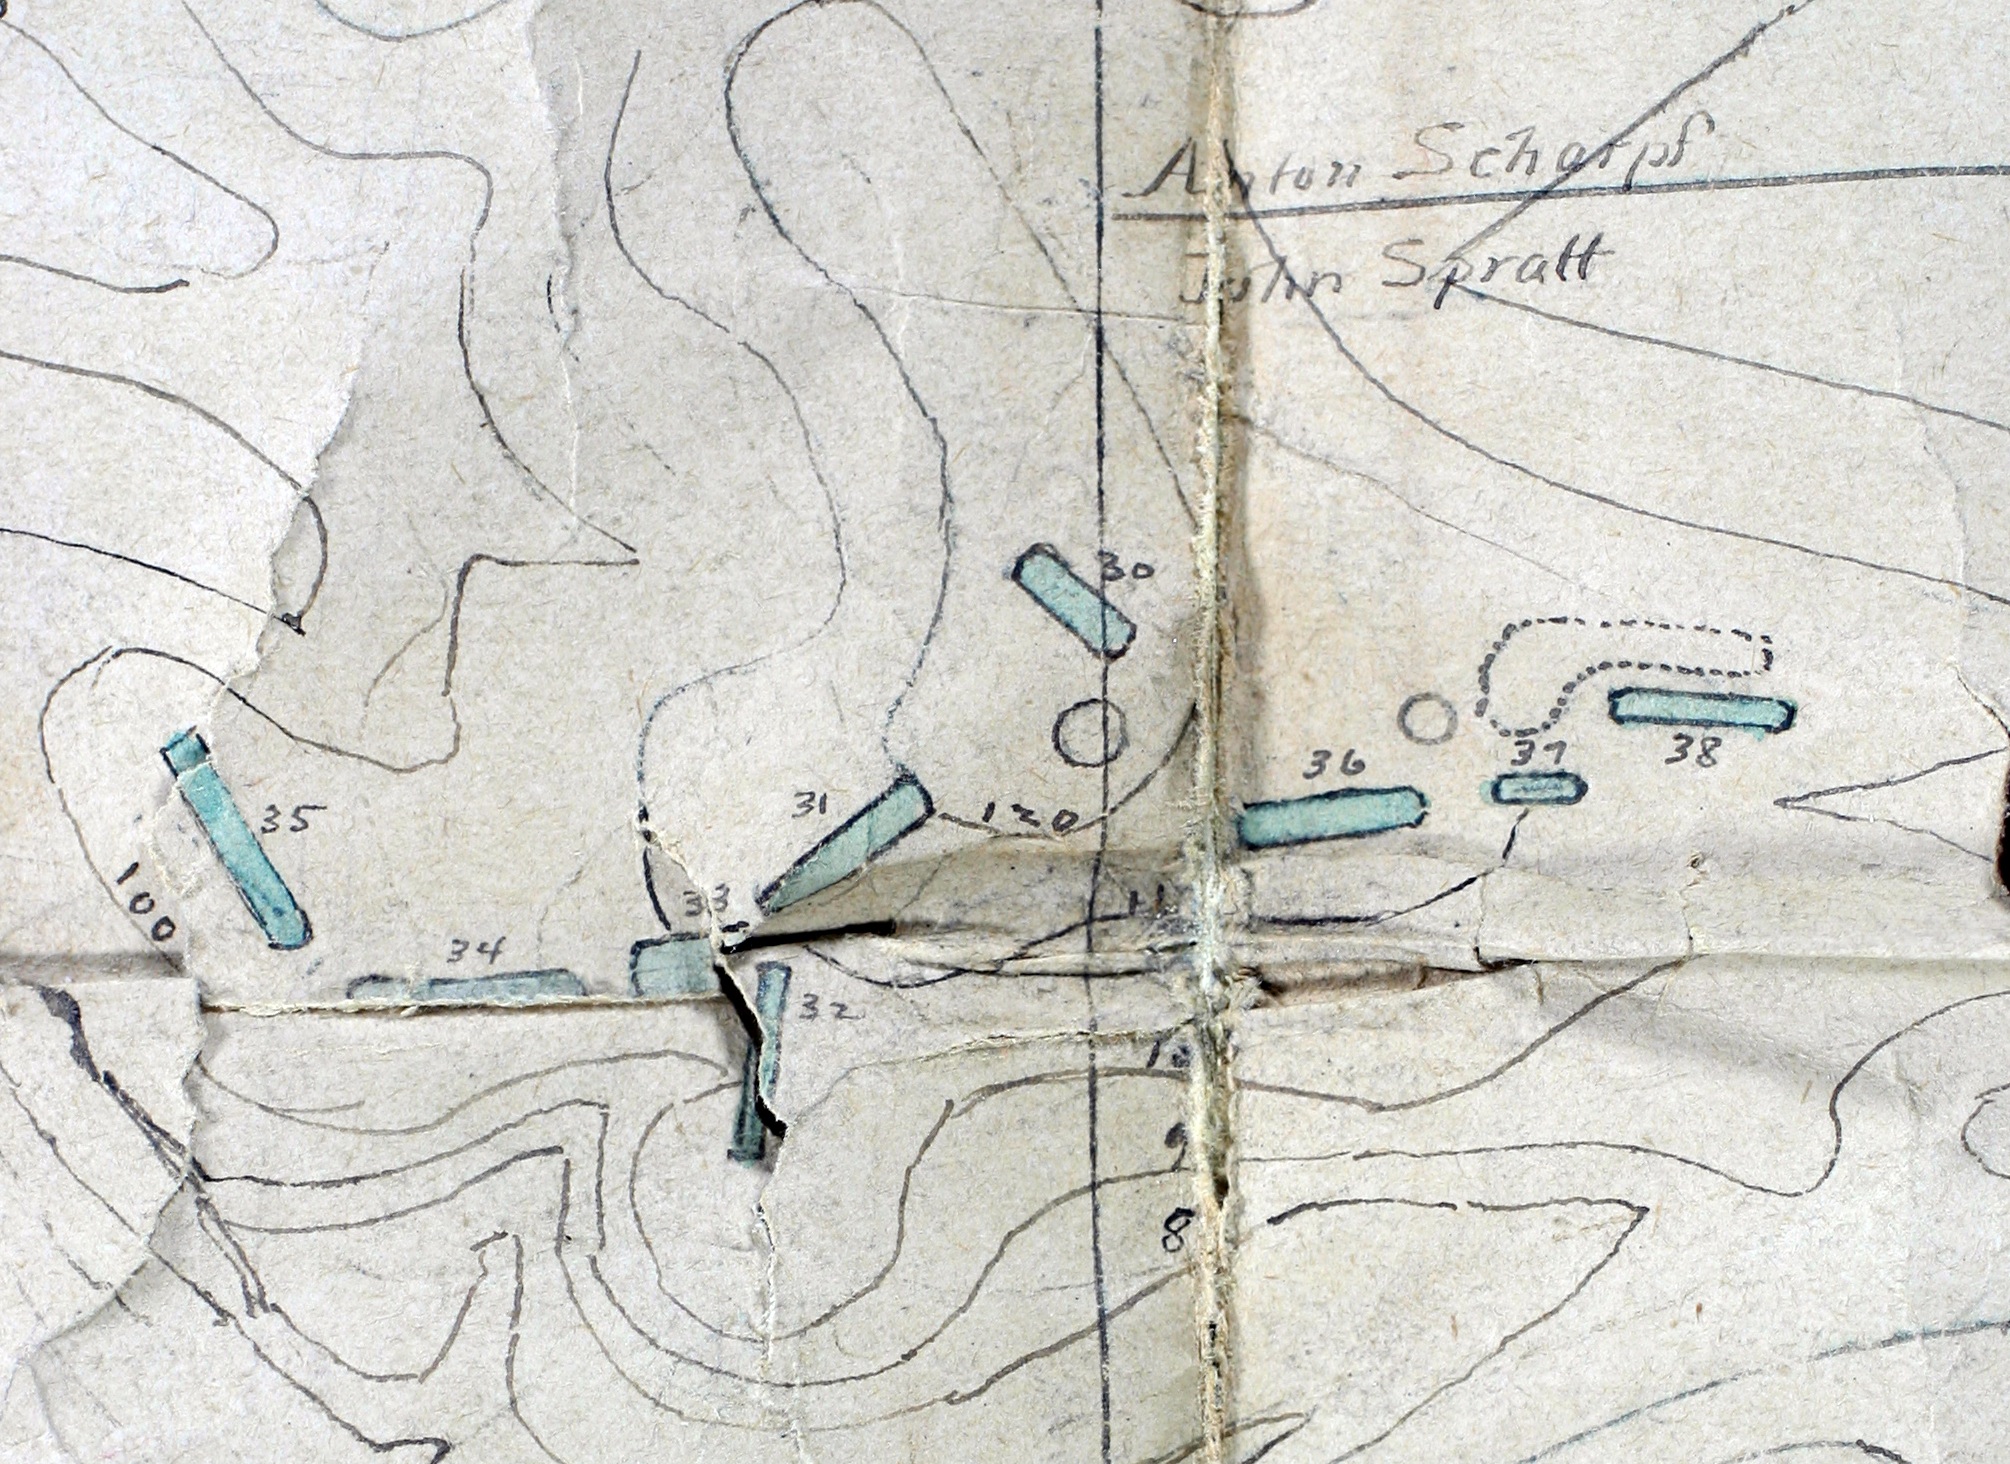 Another section from Nickerson's map